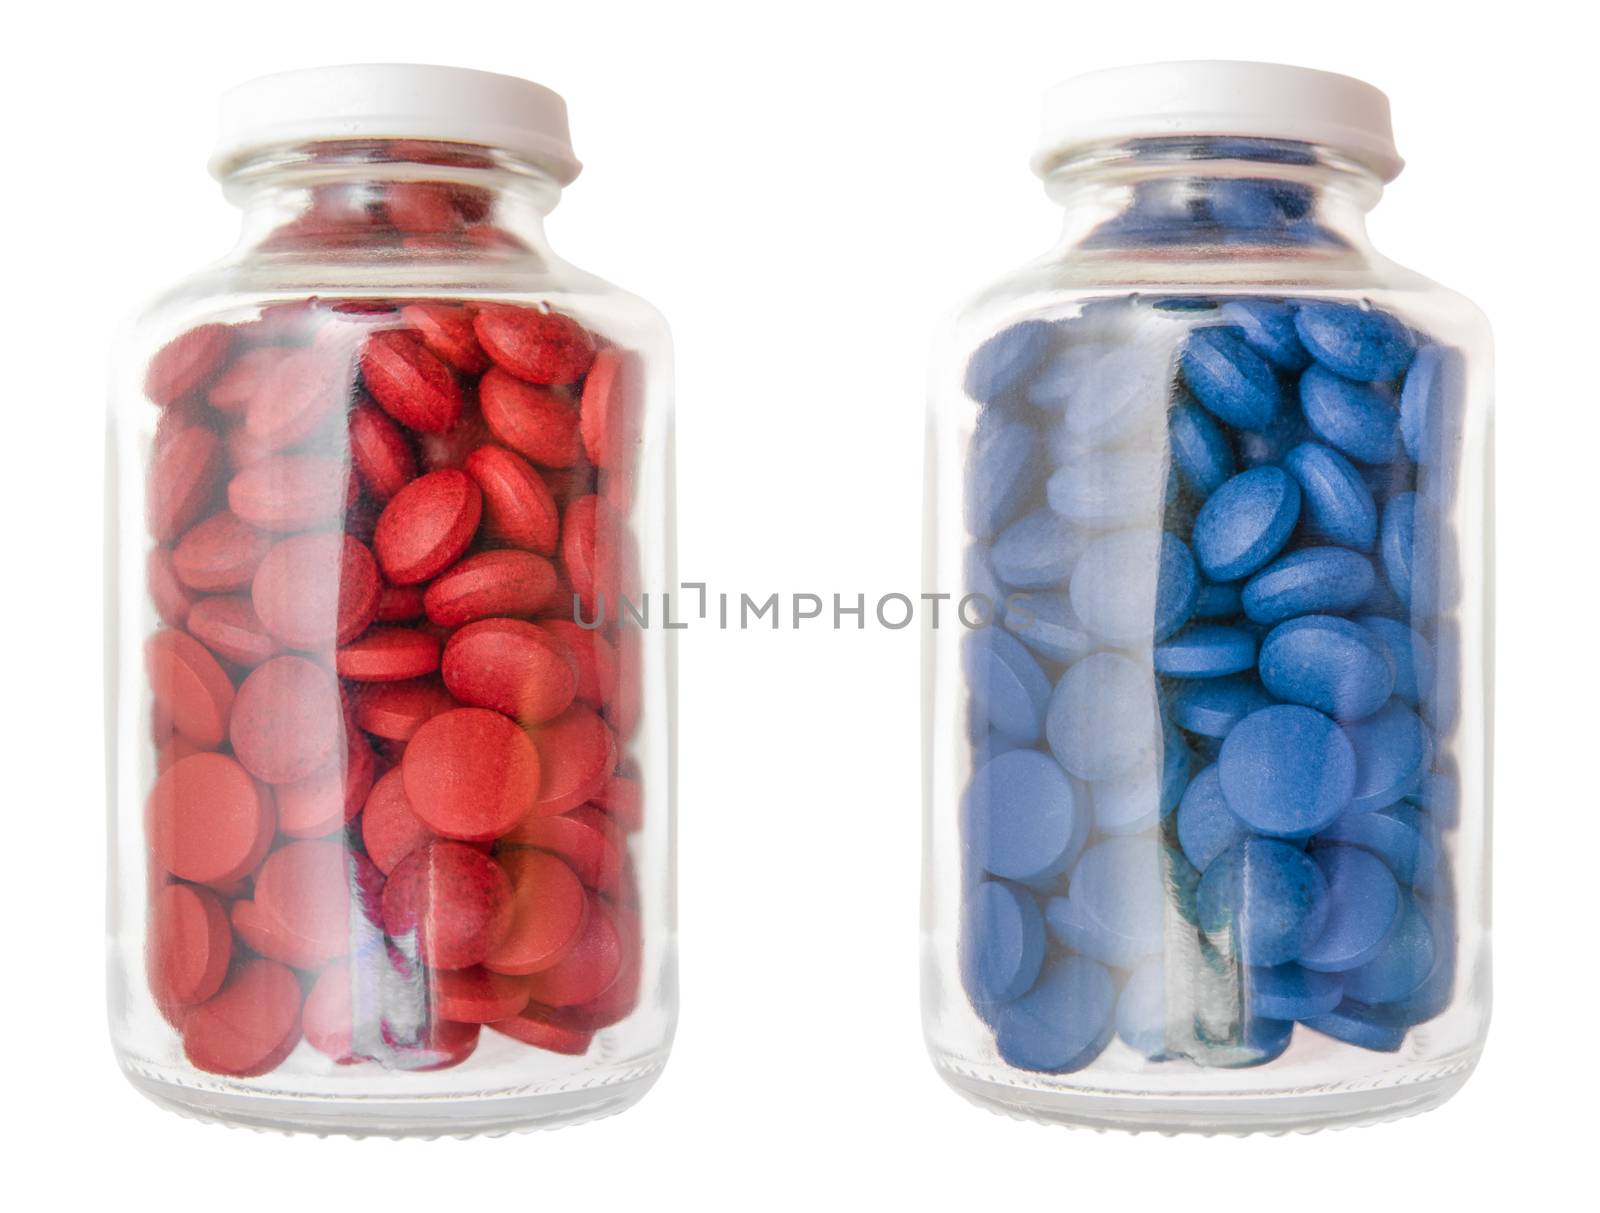 Red And Blue Pills Or Tablets In Glass Containers Isolated On A White Background